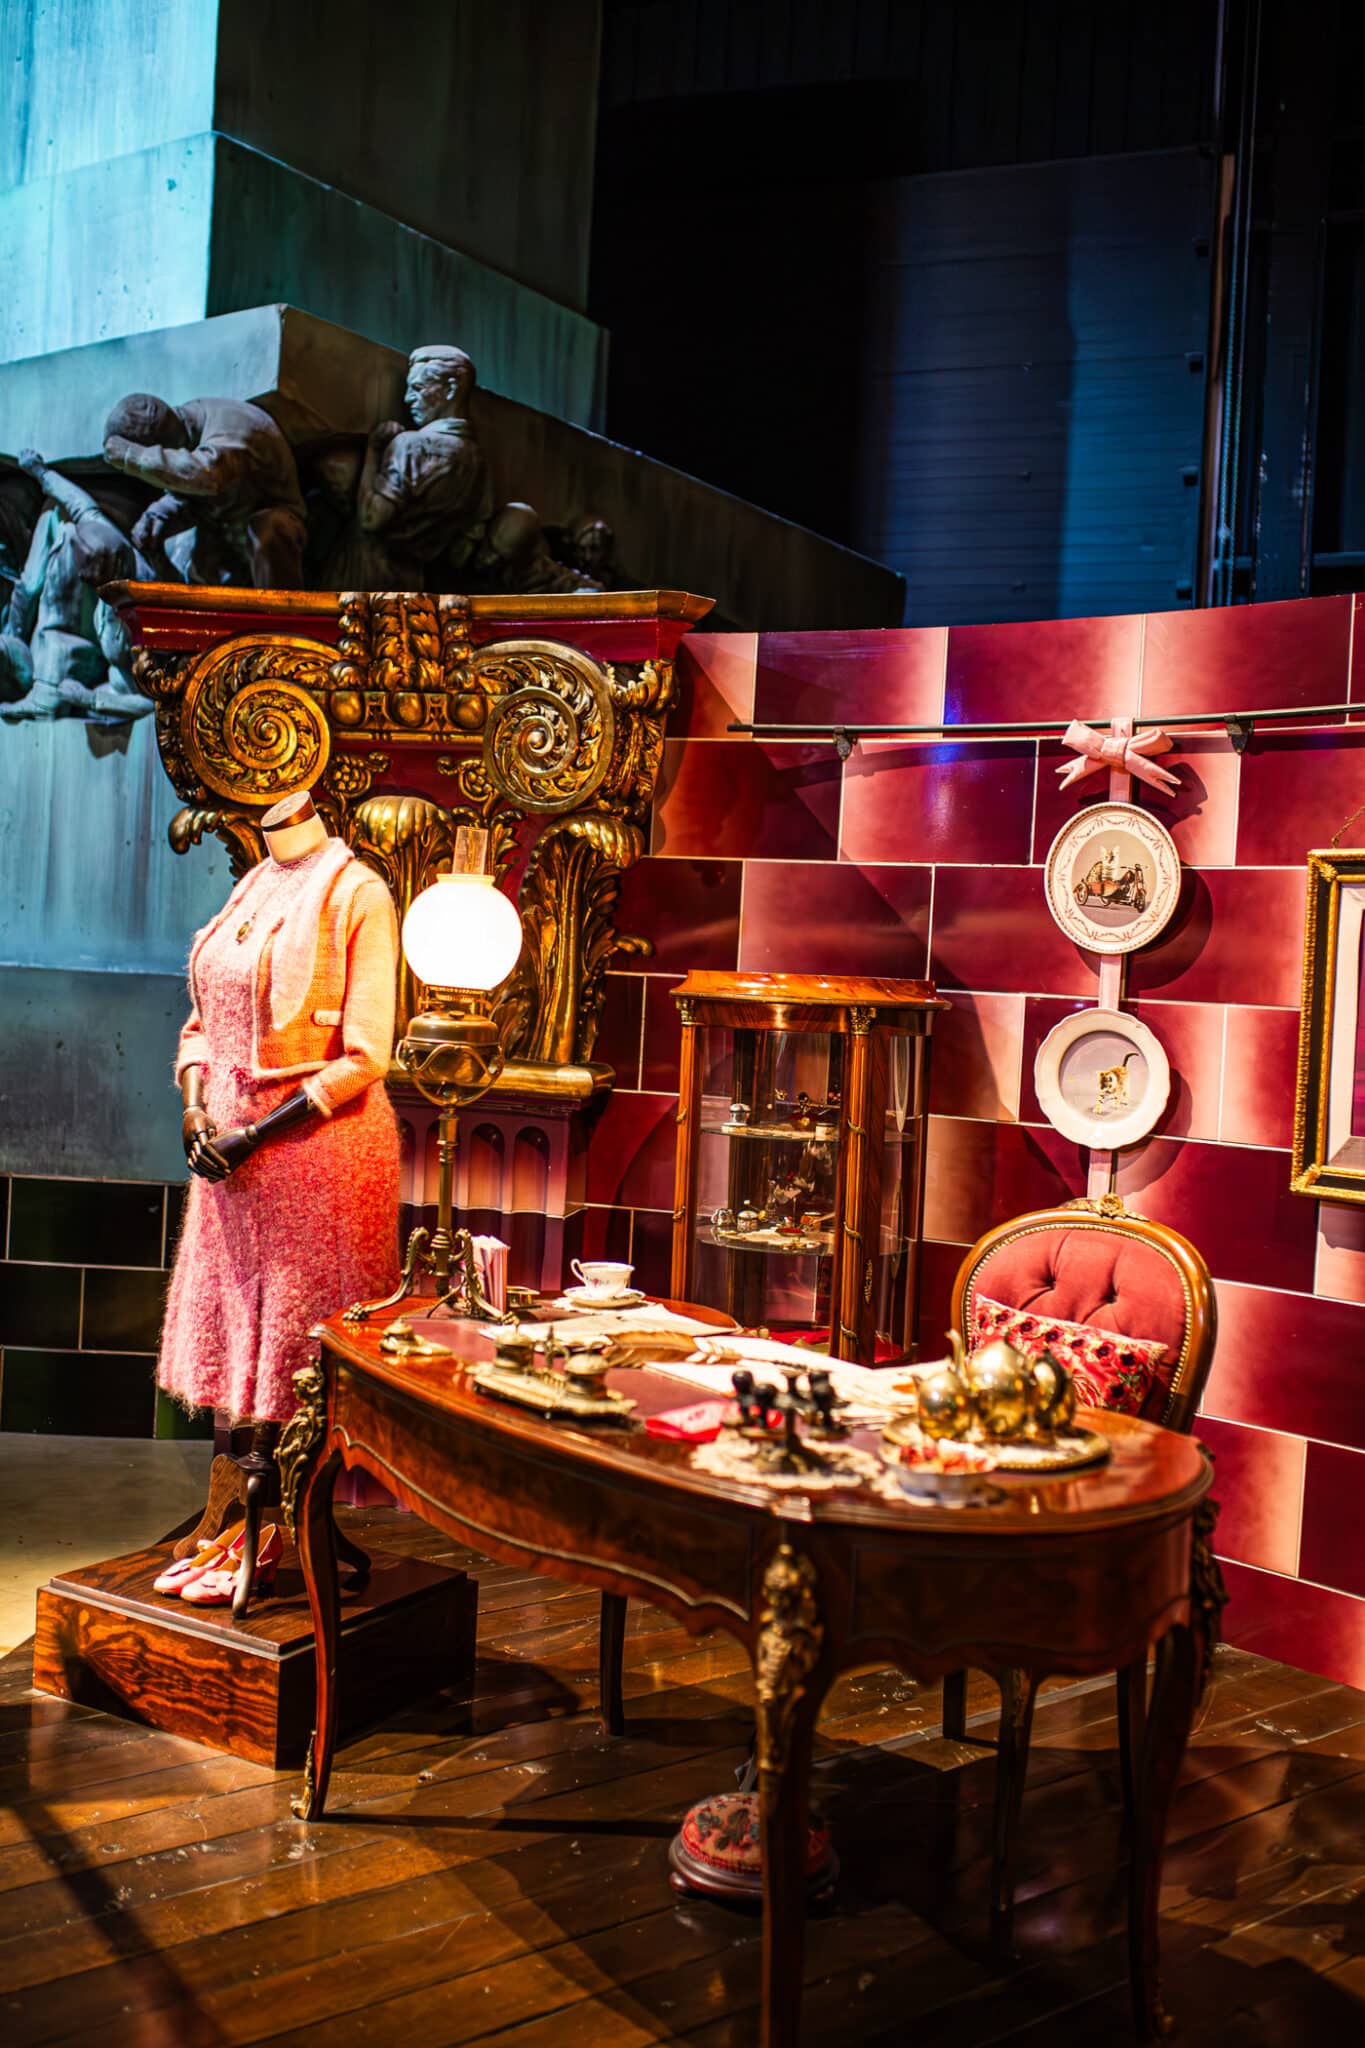 Dolores Umbridge's office complete with cat plates and a look at her pink costume worn in the Harry Potter movies. 